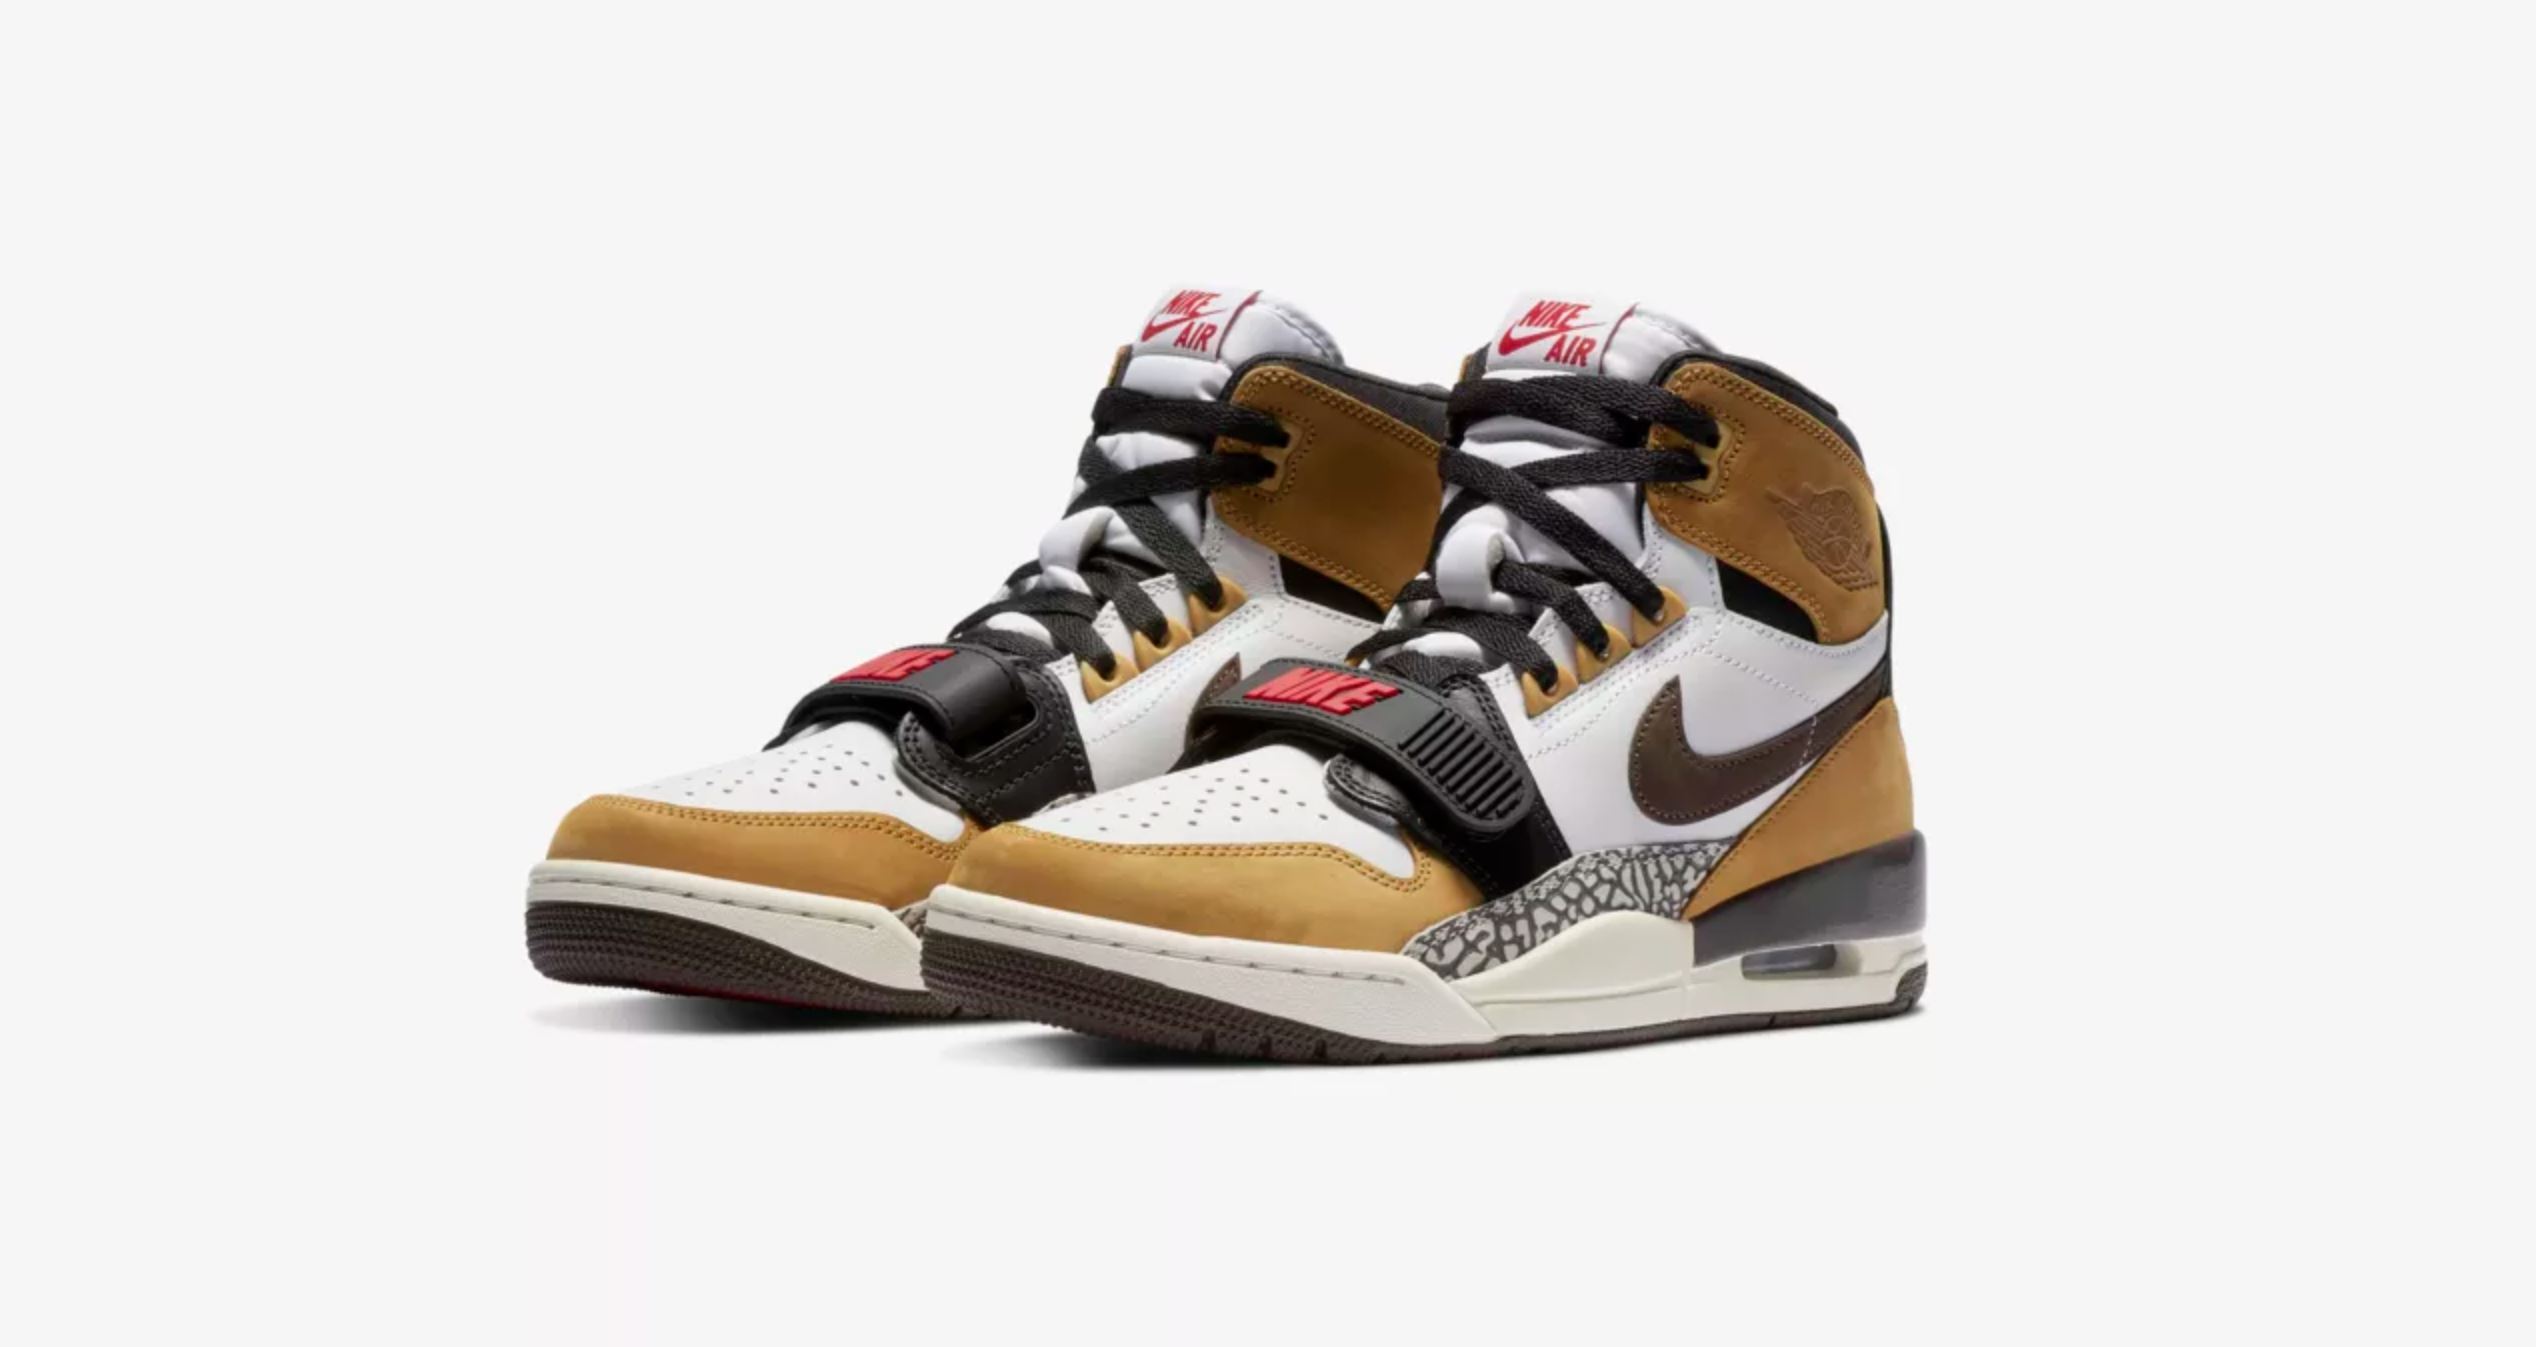 The Air Jordan Legacy 312 'Wheat/Varsity Red' Gives Off ROTY Vibes 